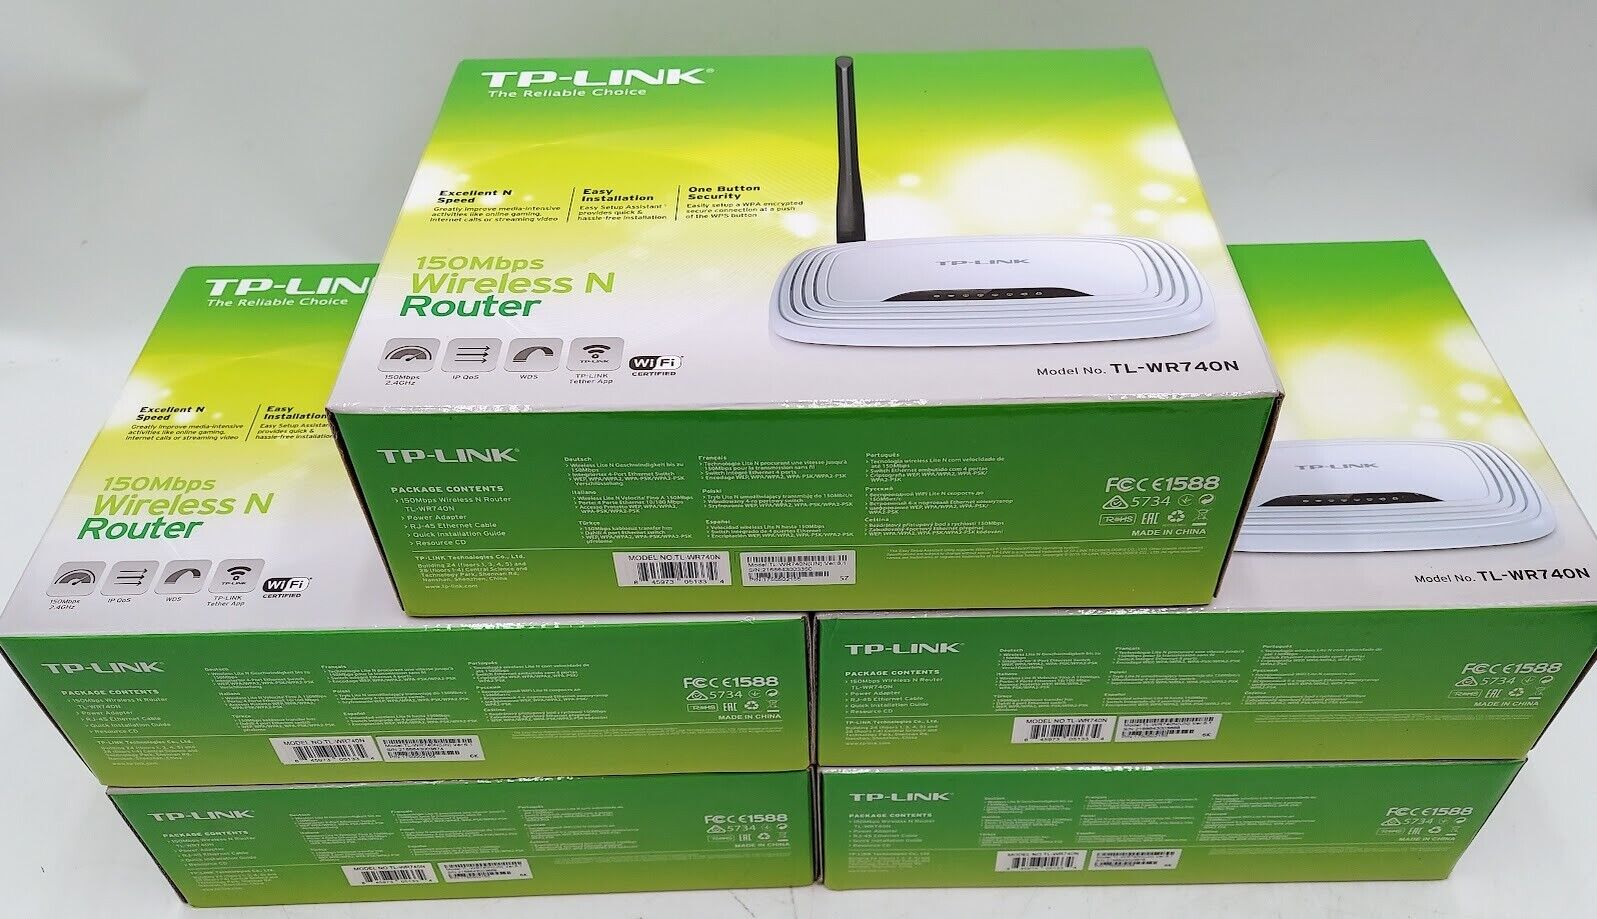 LOT OF 5 TP-Link TL-WR740N 150 Mbps Wireless N Router